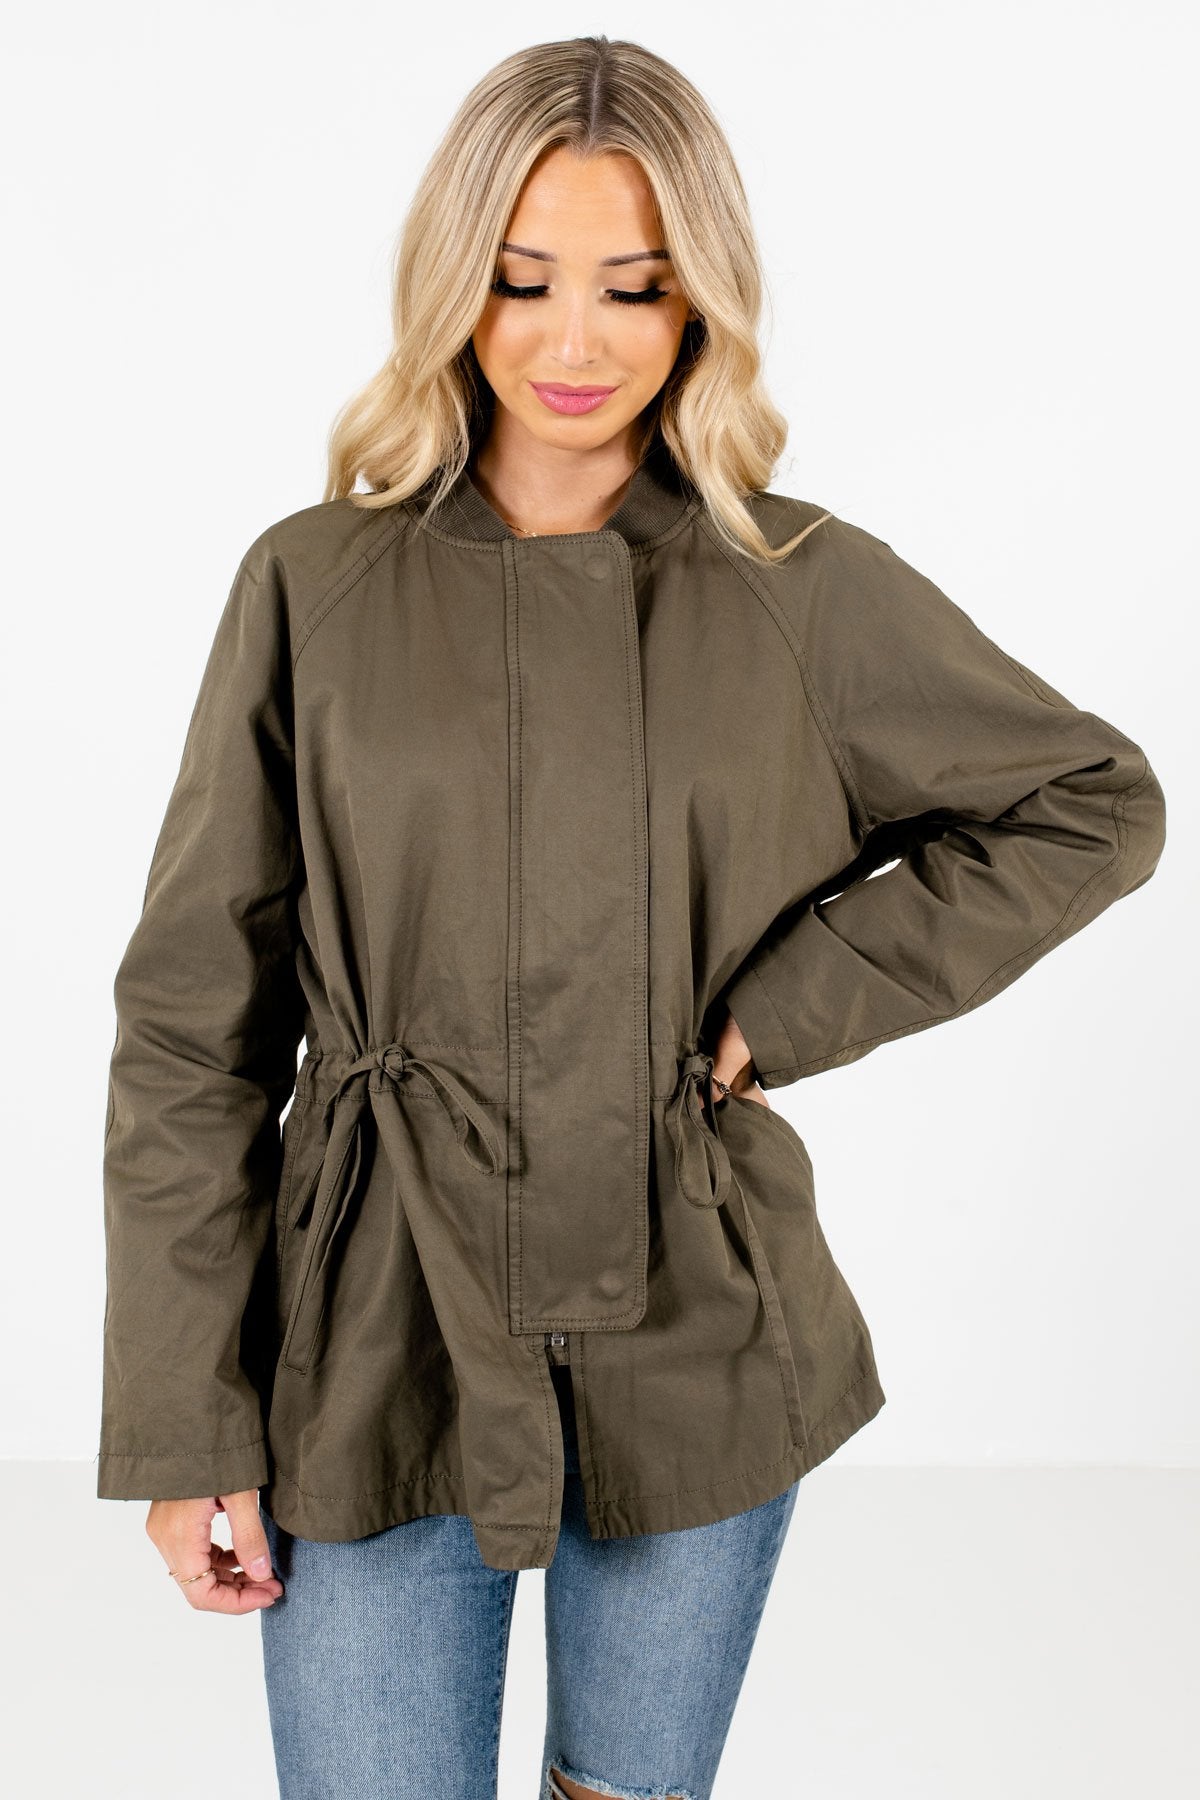 Women's Olive Green Warm and Cozy Boutique Clothing